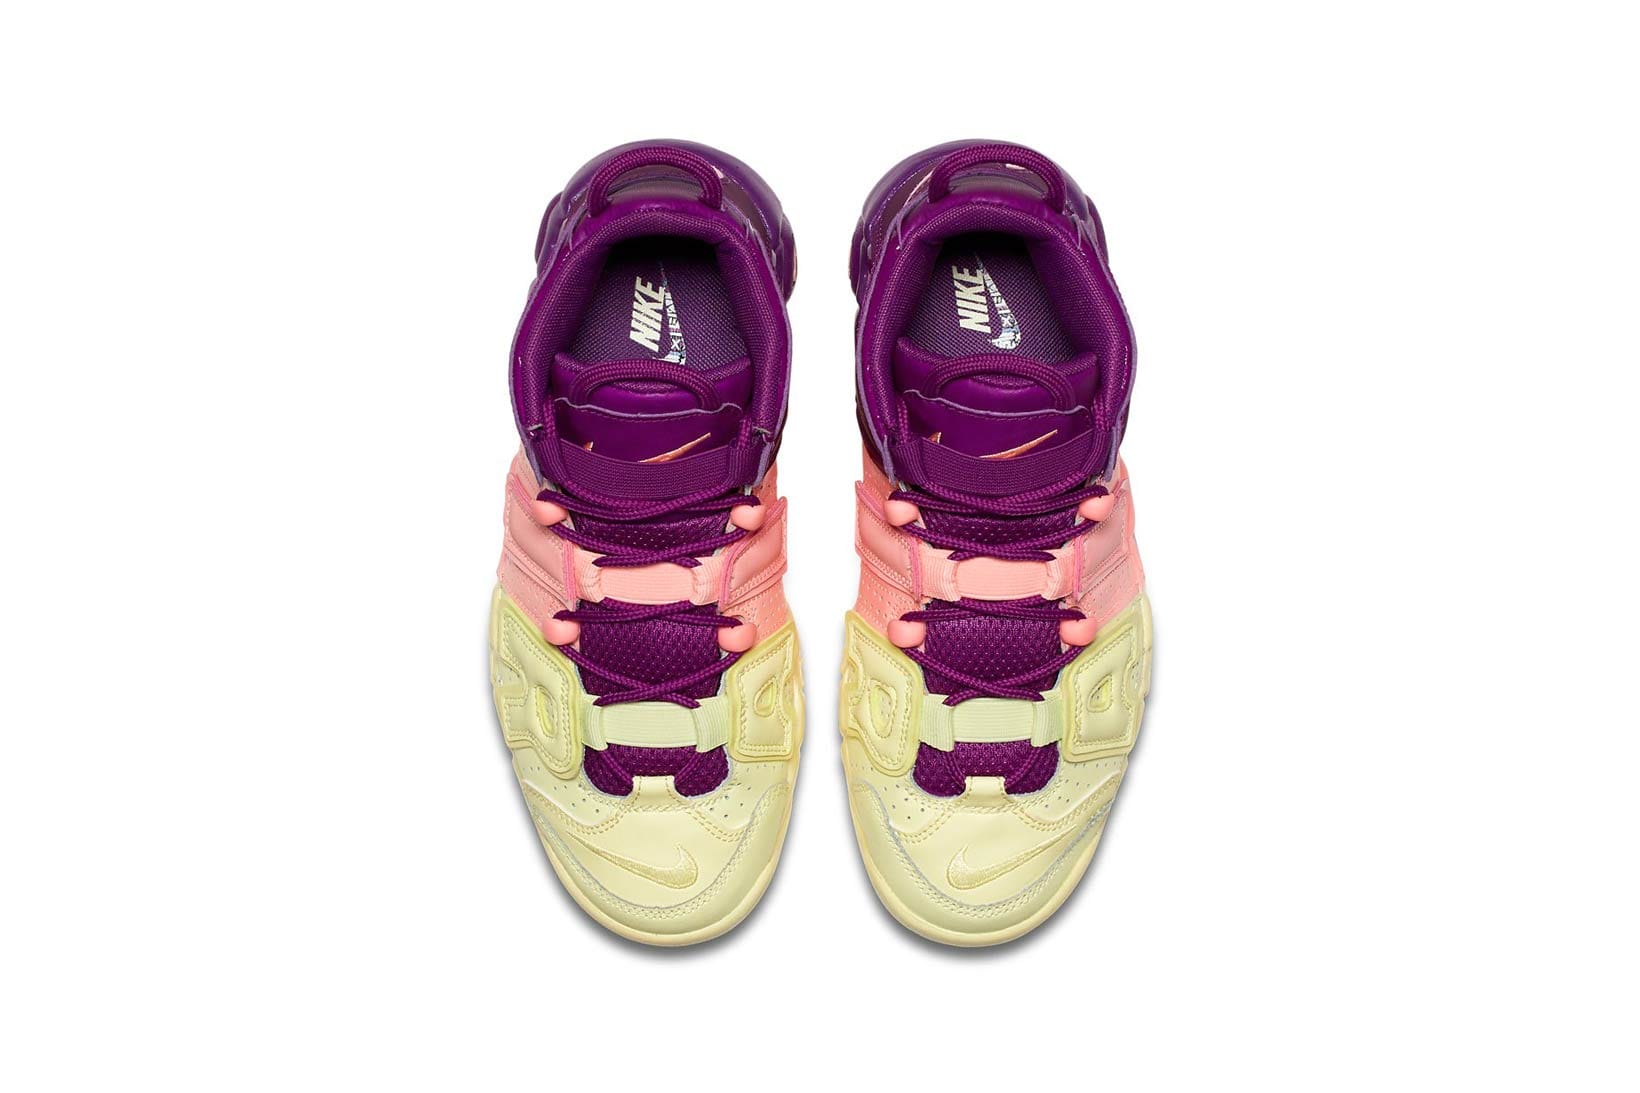 Nike Air More Uptempo in Pink, Purple 